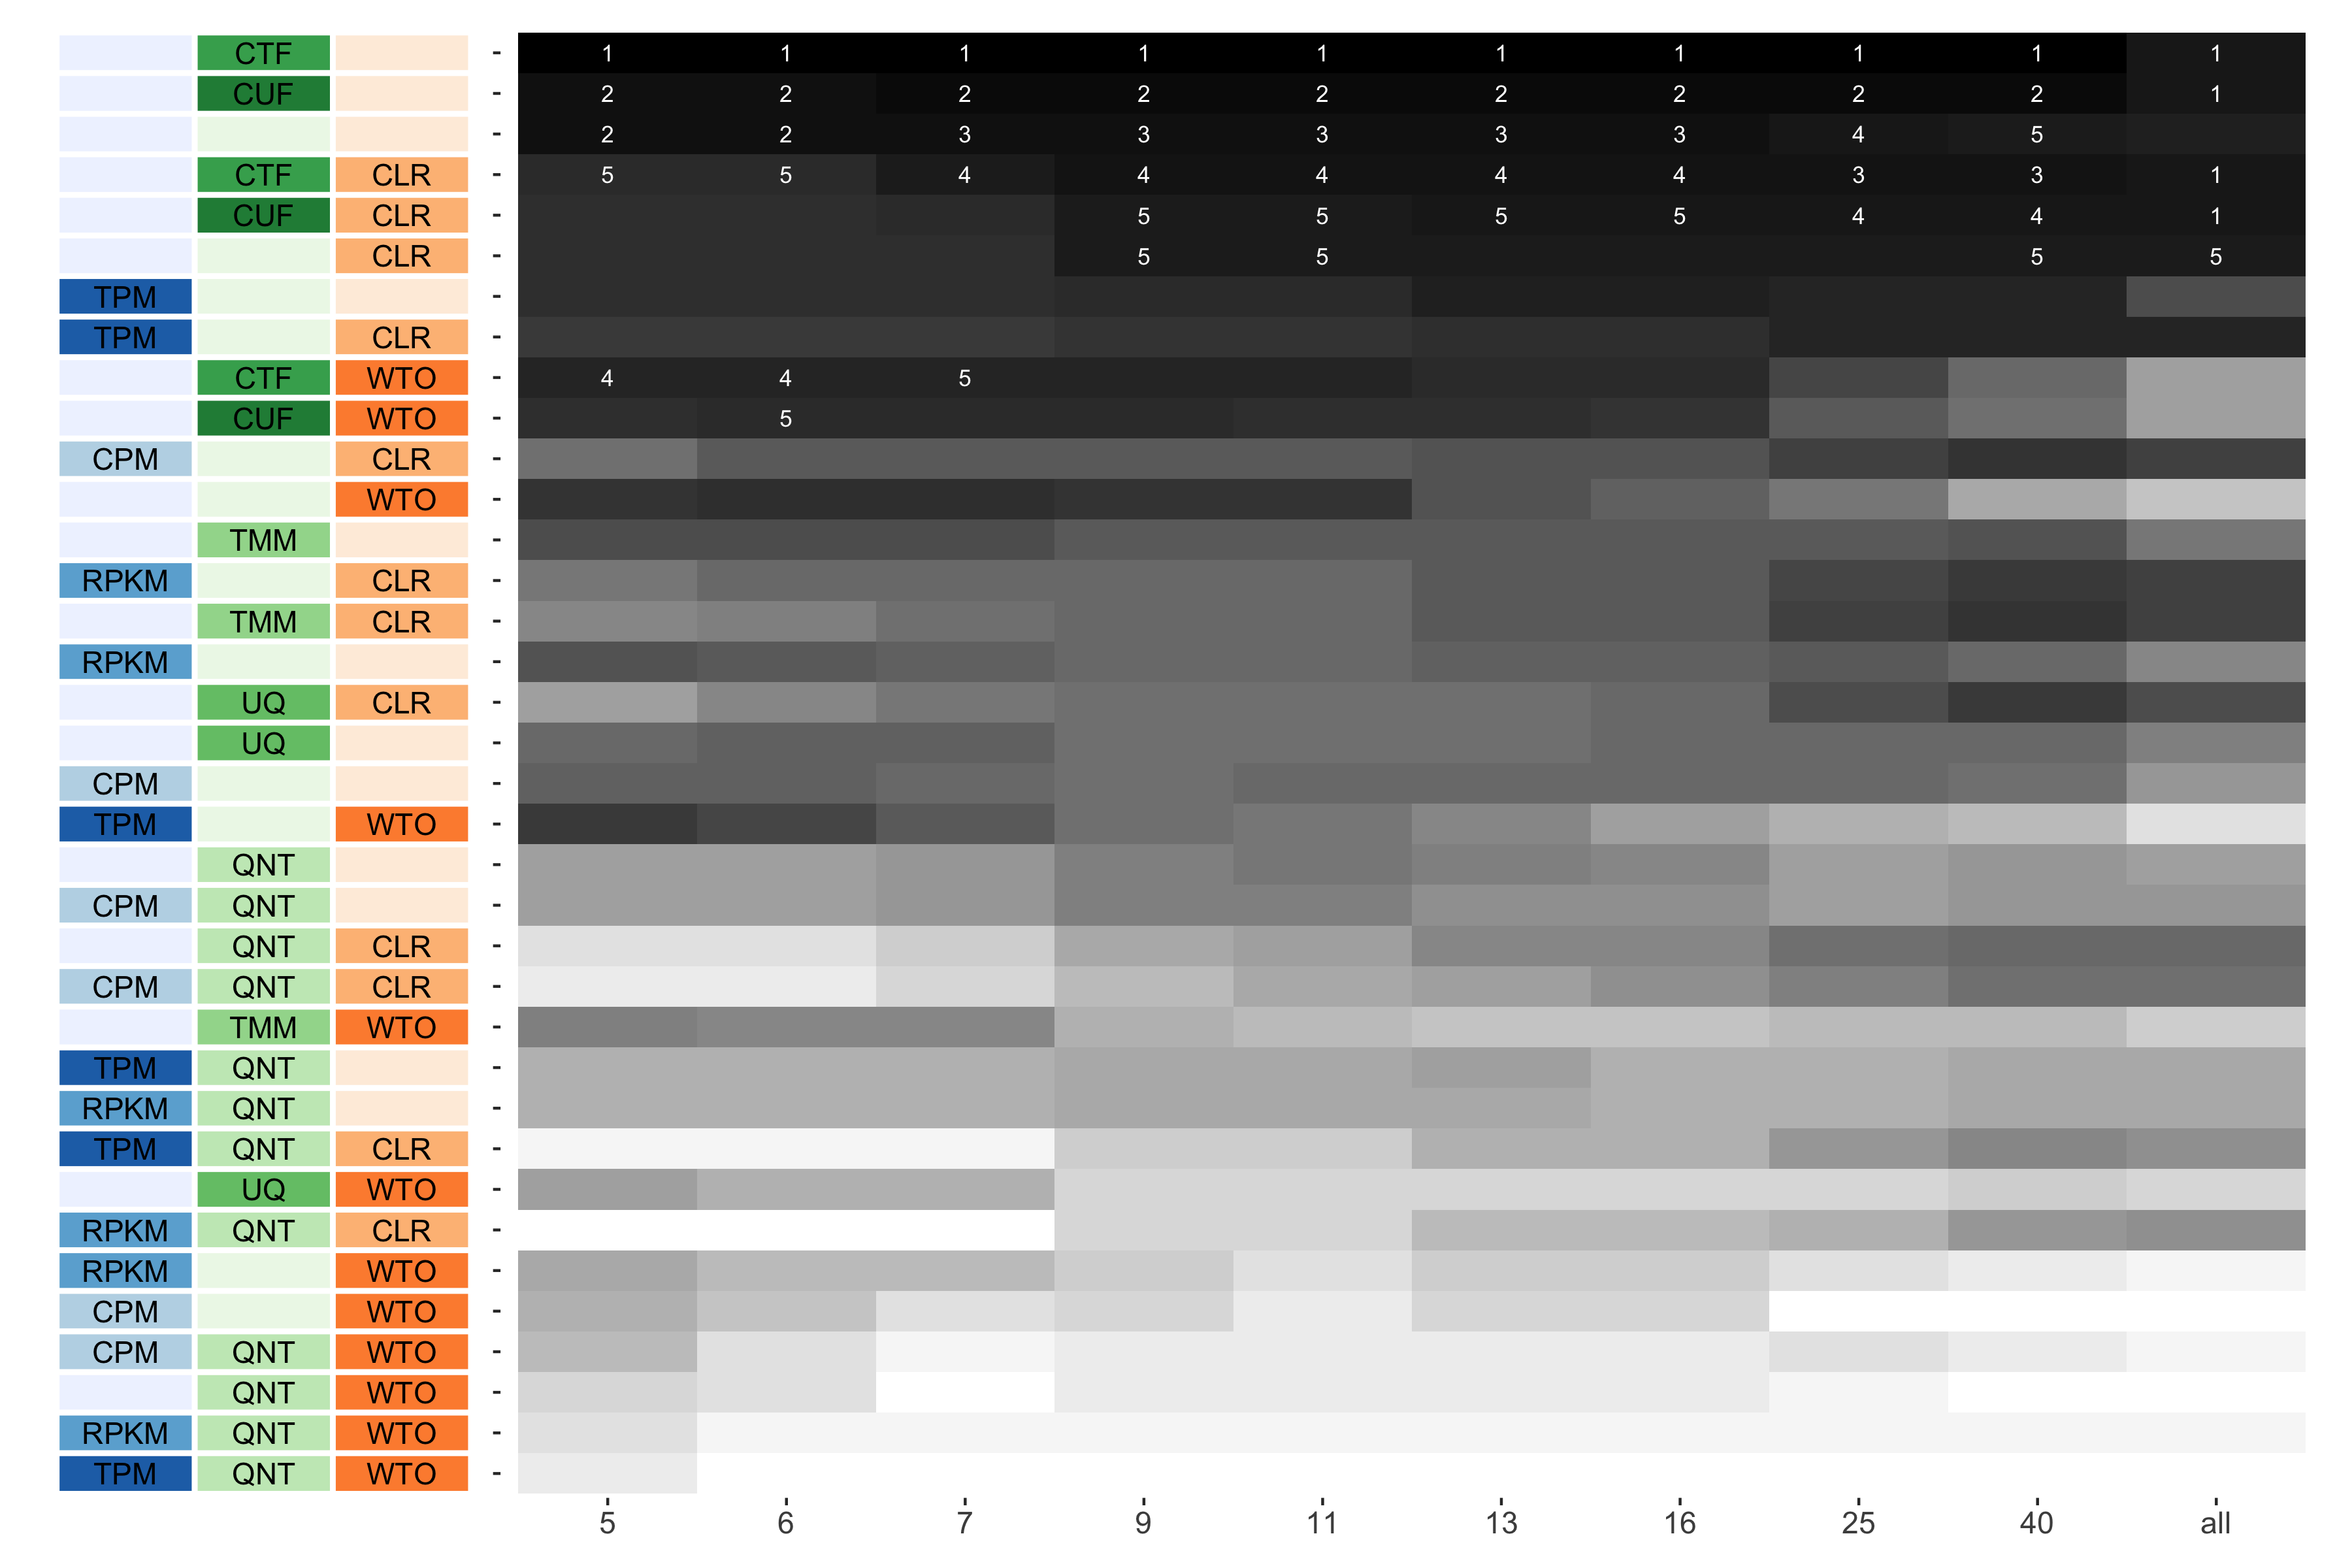 The heatmap shows the number of times (cell color) each workflow (row) outperforms other workflows as sample size varies (columns), when the resulting coexpression networks are evaluated based on the tissue-naive gold standard. The darkest colors indicate workflows that are significantly better than the most other workflows. In addition, the top 5 workflows in each column are marked with their rank, with ties given minimum rank.